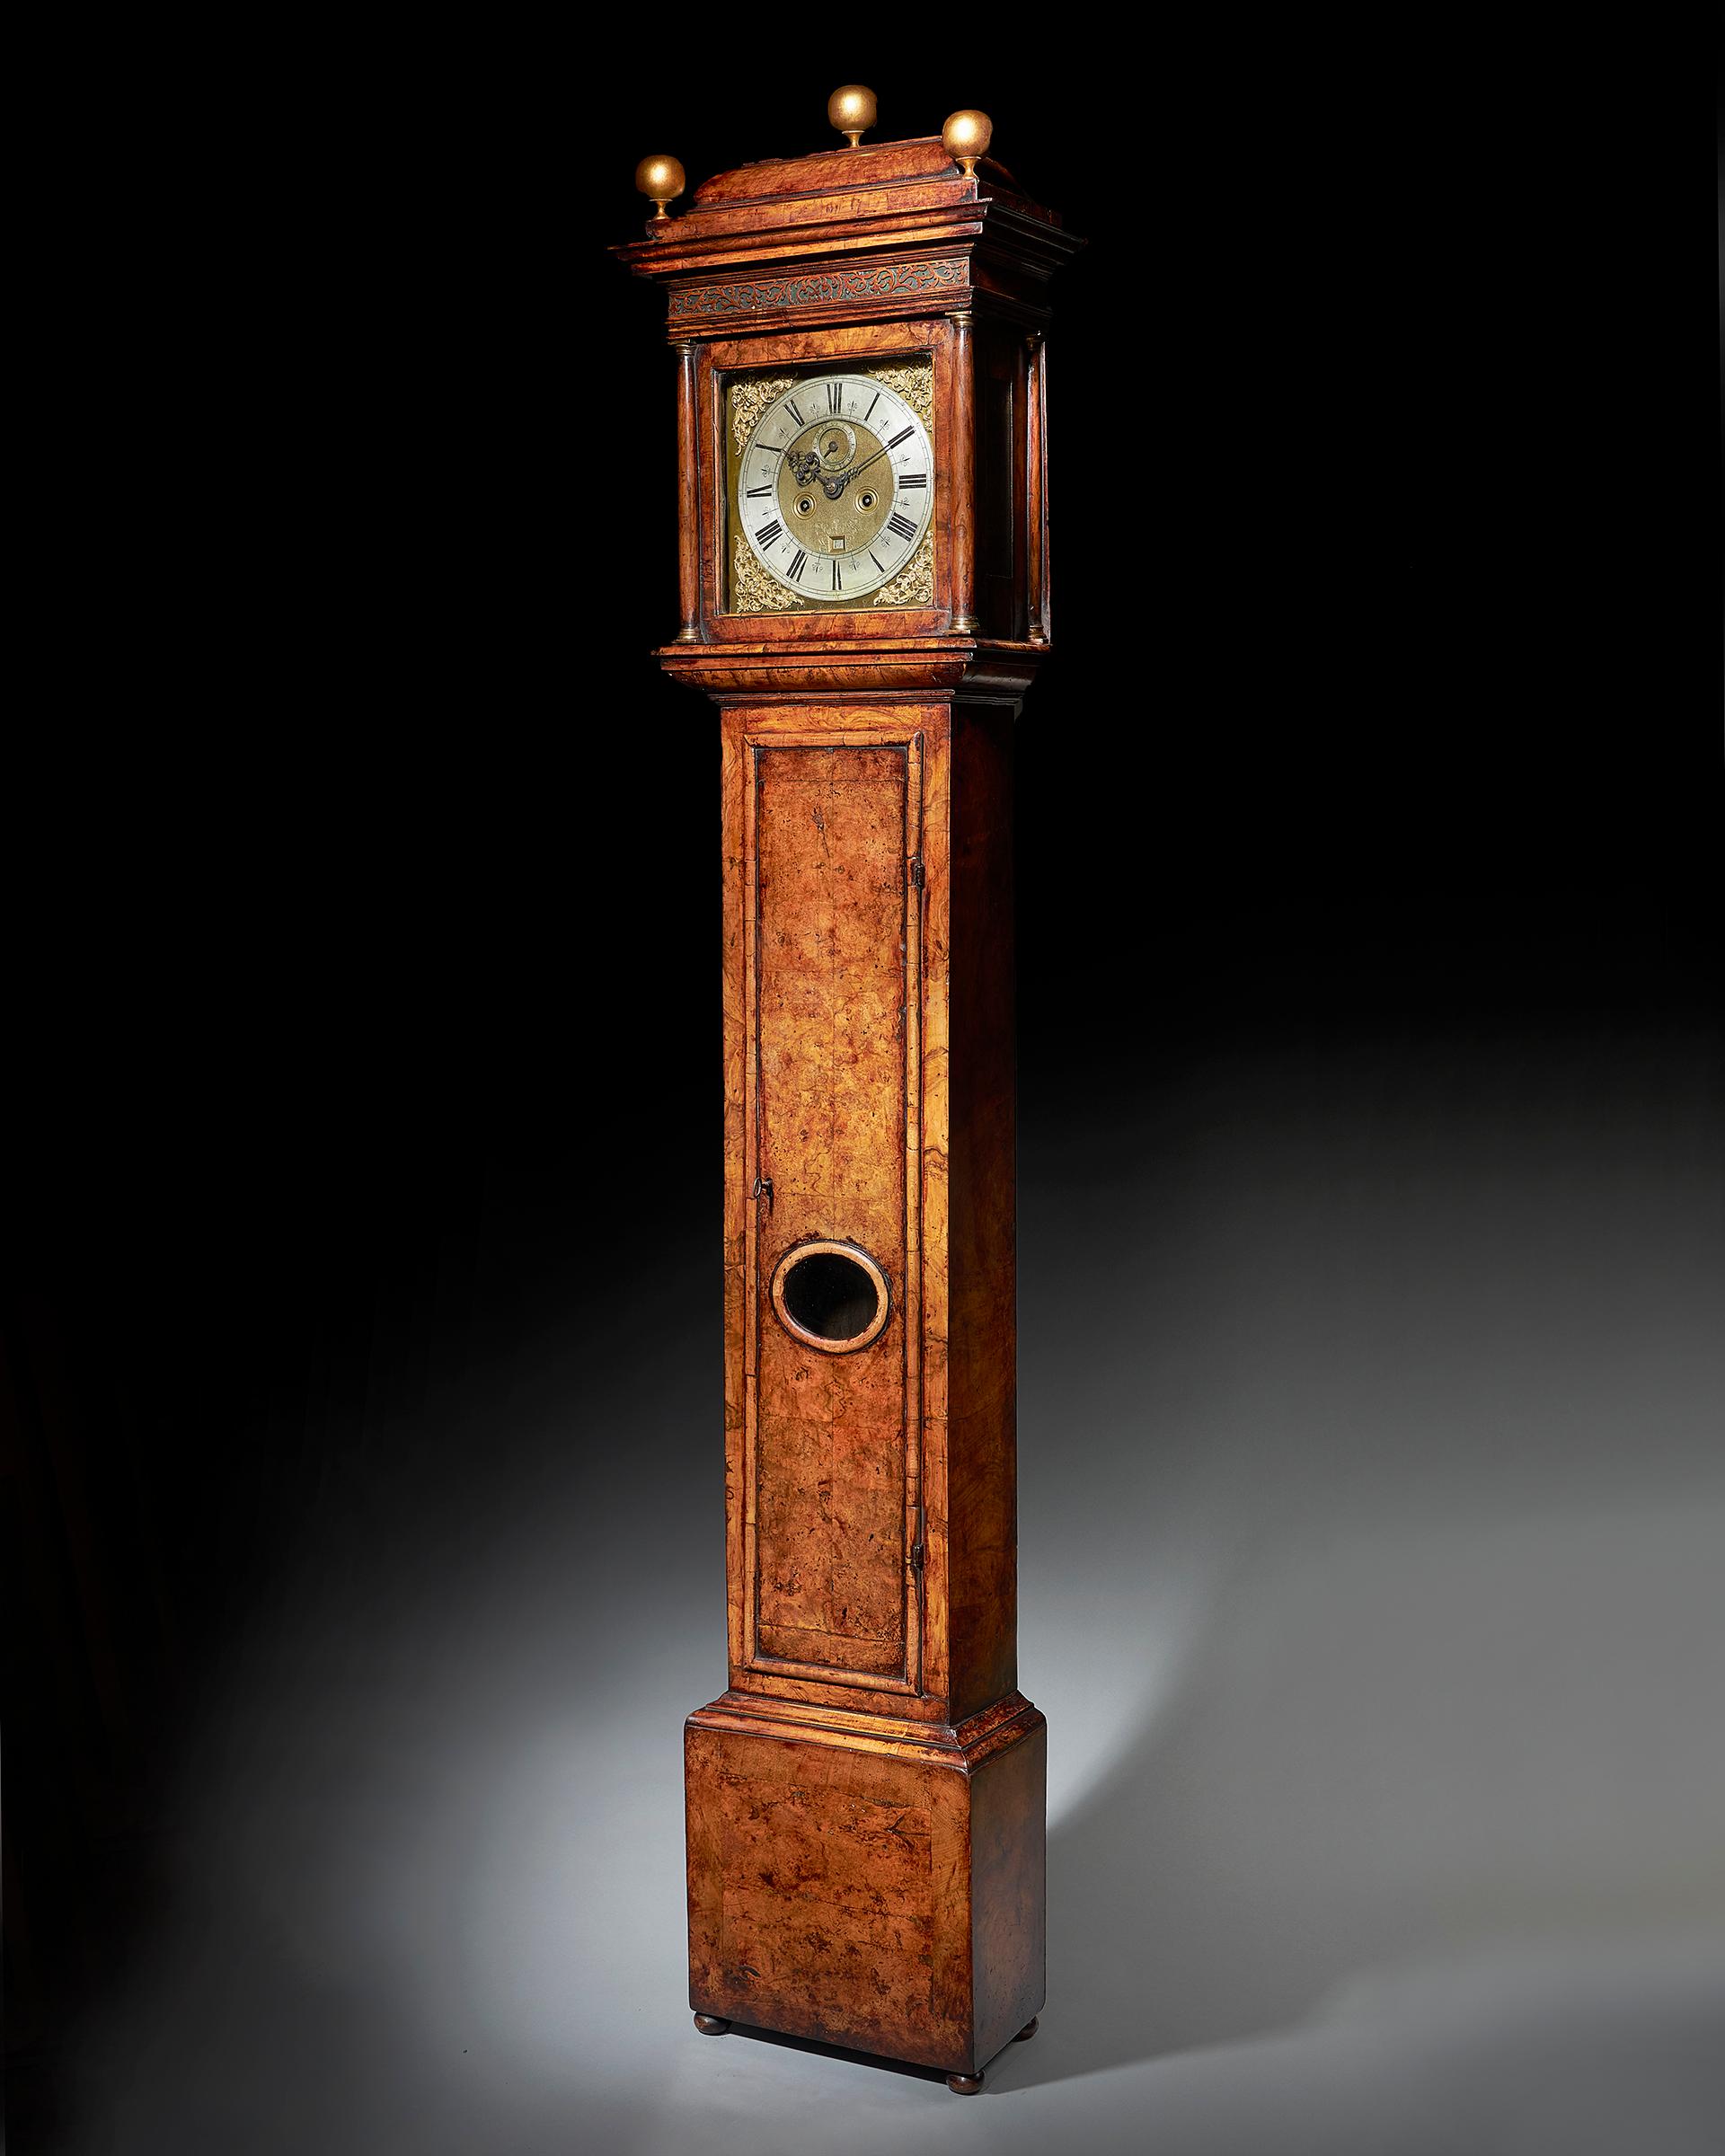 The attractive burr walnut-veneered oak case is of classic design for the period and has a warm patina. The formerly rising hood has a shallow caddy, lovely blind fretwork in the frieze, is flanked by plain brass-capped columns and has glazed